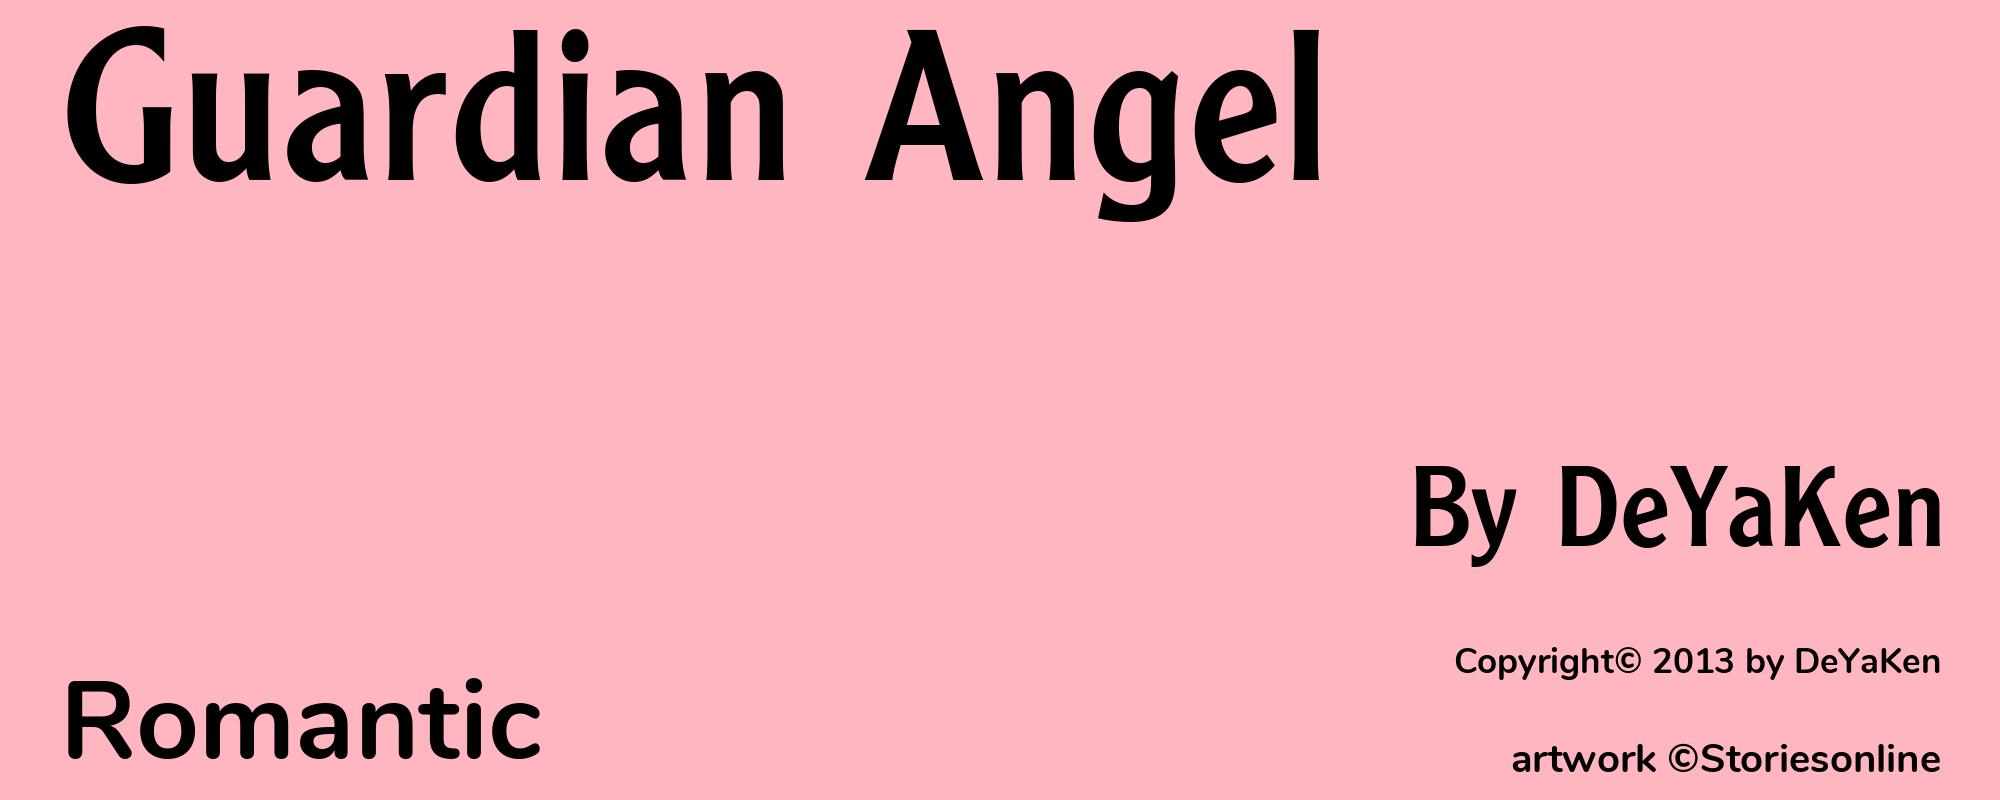 Guardian Angel - Cover